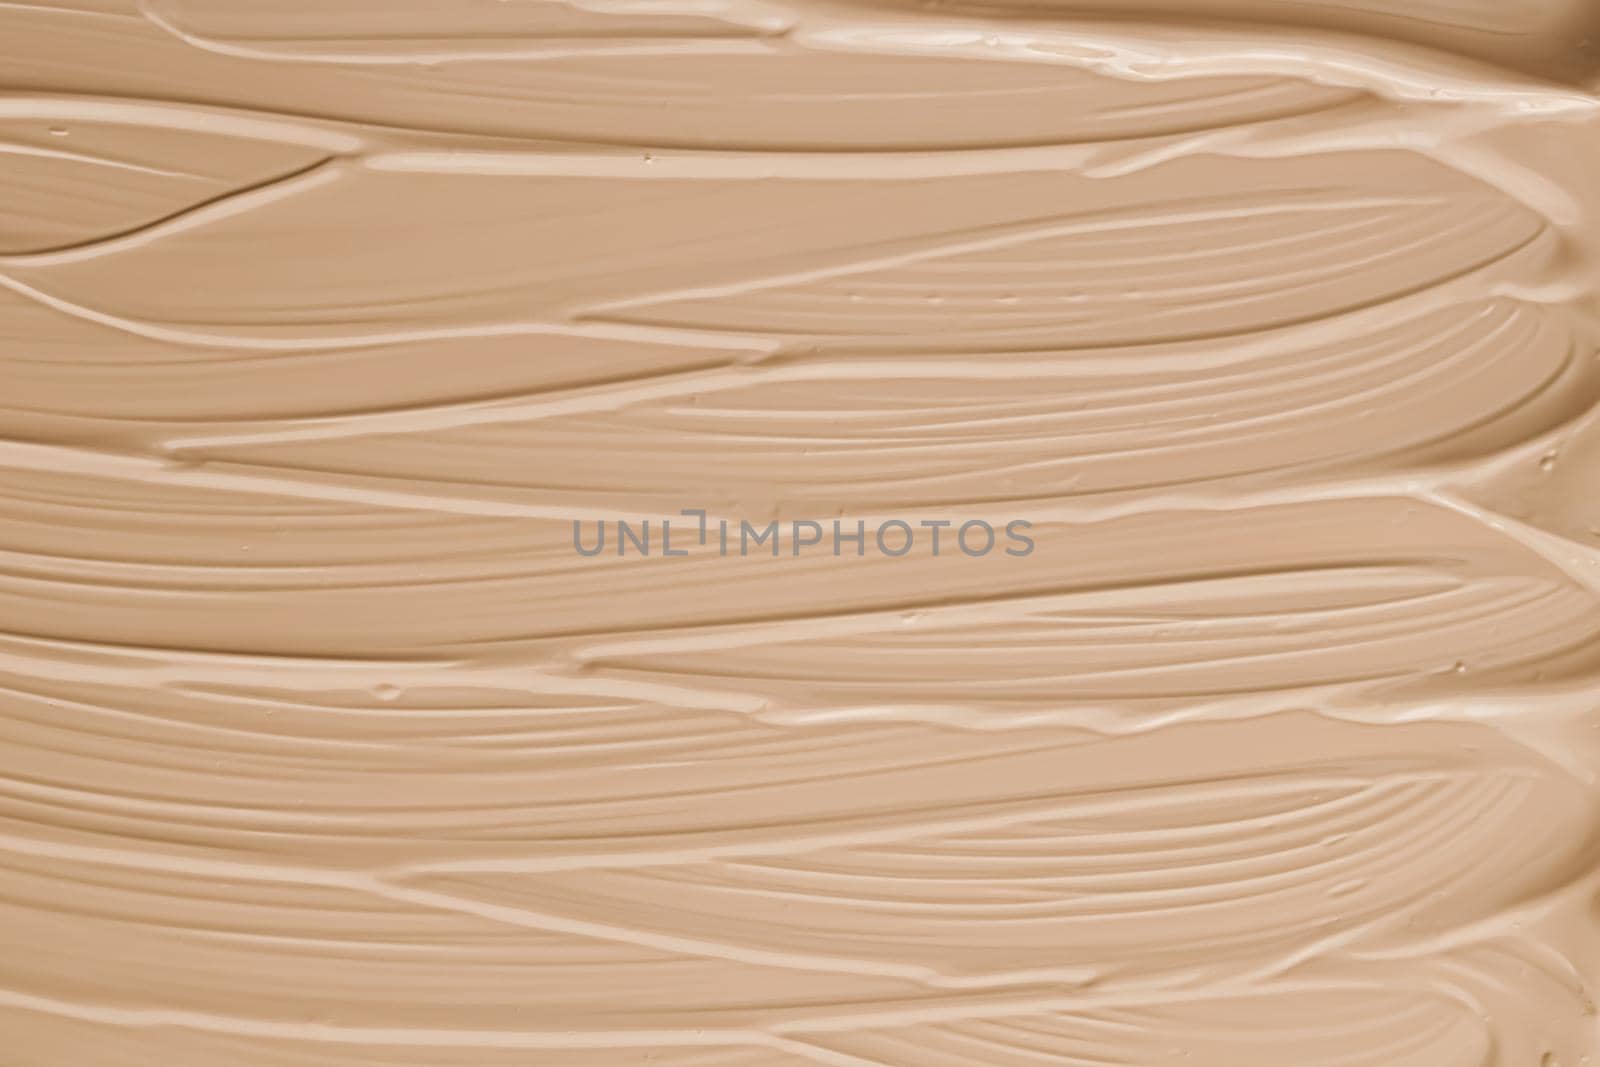 Beige cosmetic texture background, make-up and skincare cosmetics product, cream, lipstick, foundation macro as luxury beauty brand, holiday flatlay design.